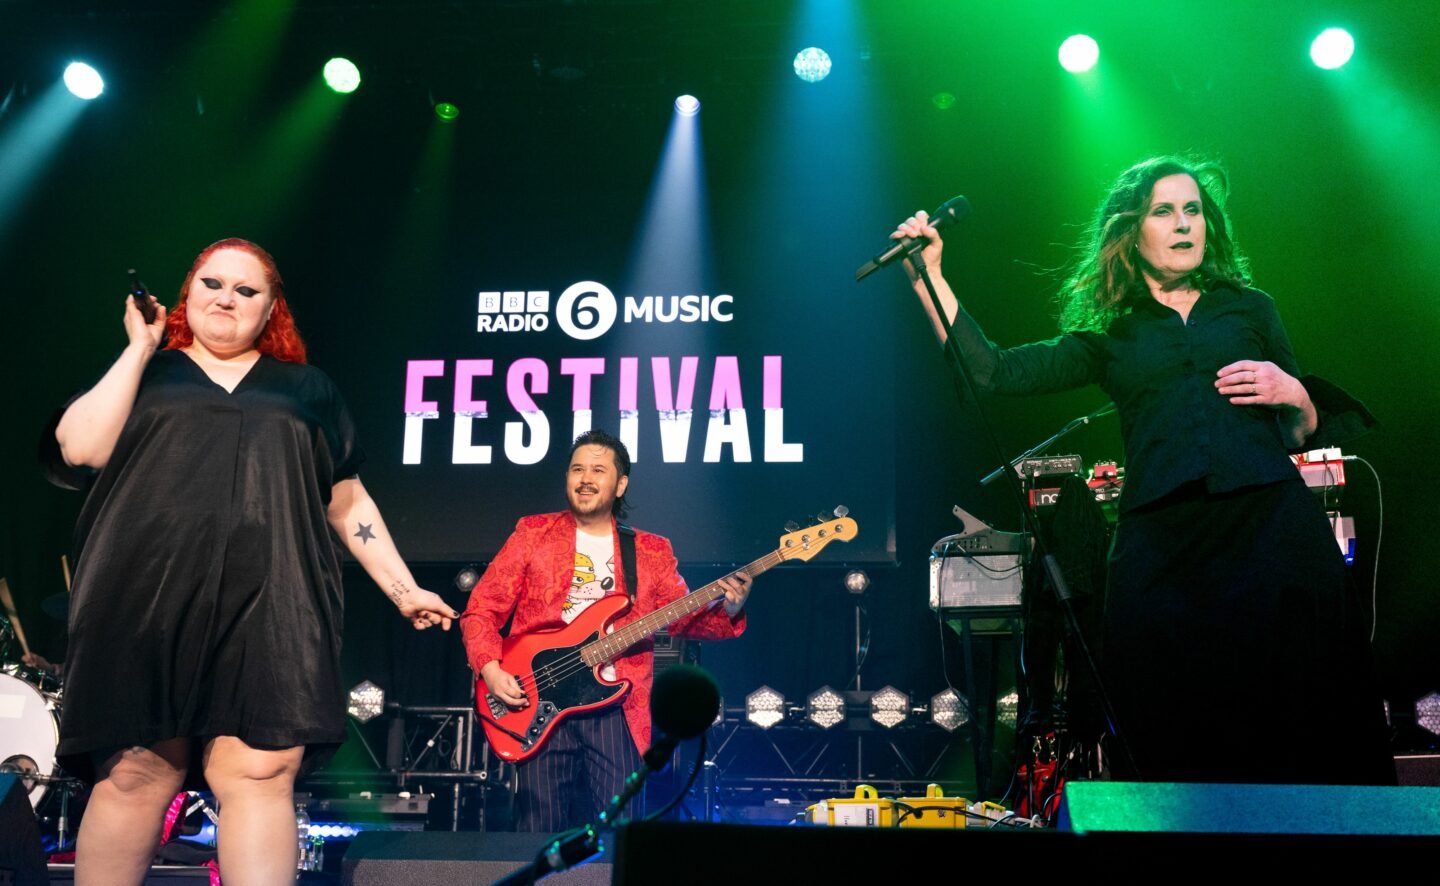 Beth Ditto performs in a hot pink dress onstage at BBC 6 festival with her band Gossip and Alison Moyet